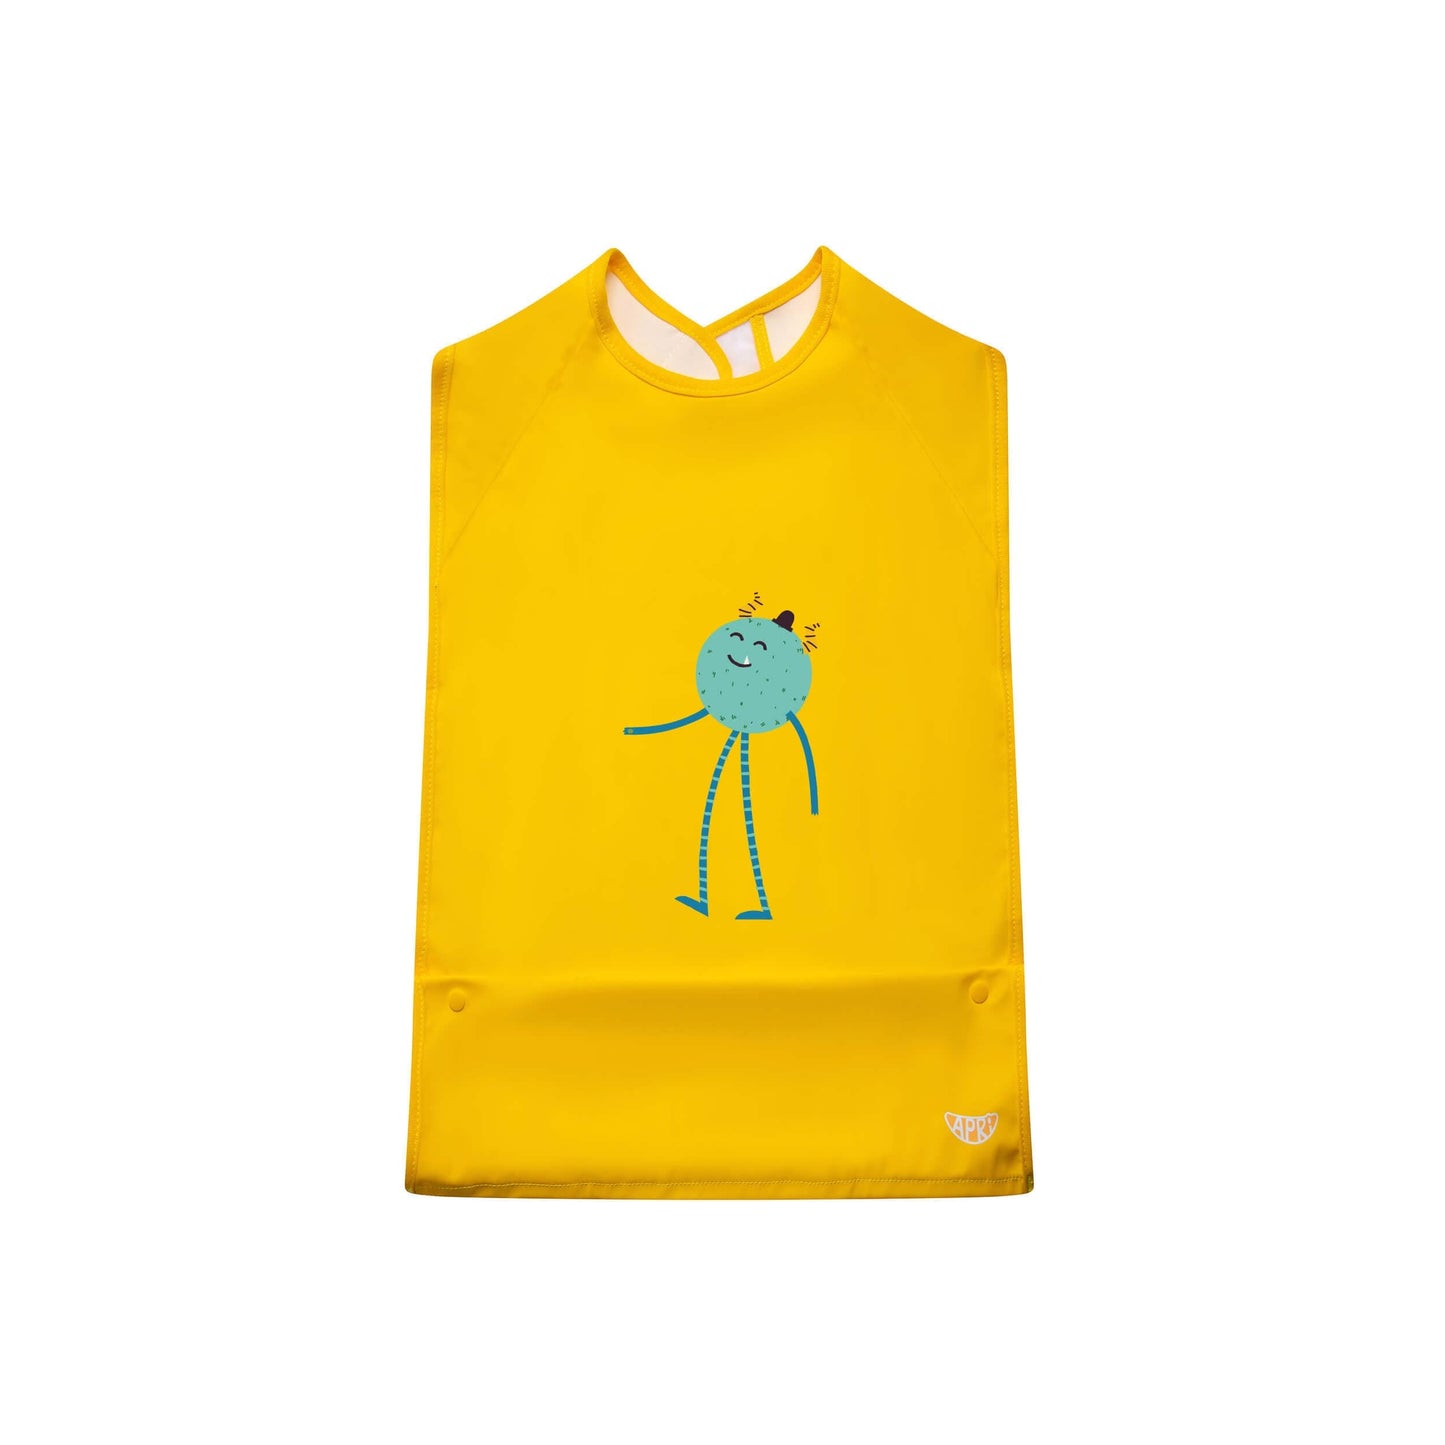 Washable disability bibs for  kids, teens and adults. Sunshine yellow , sleeveless. Features a food pocket, innovative fastener, and cute monster graphic